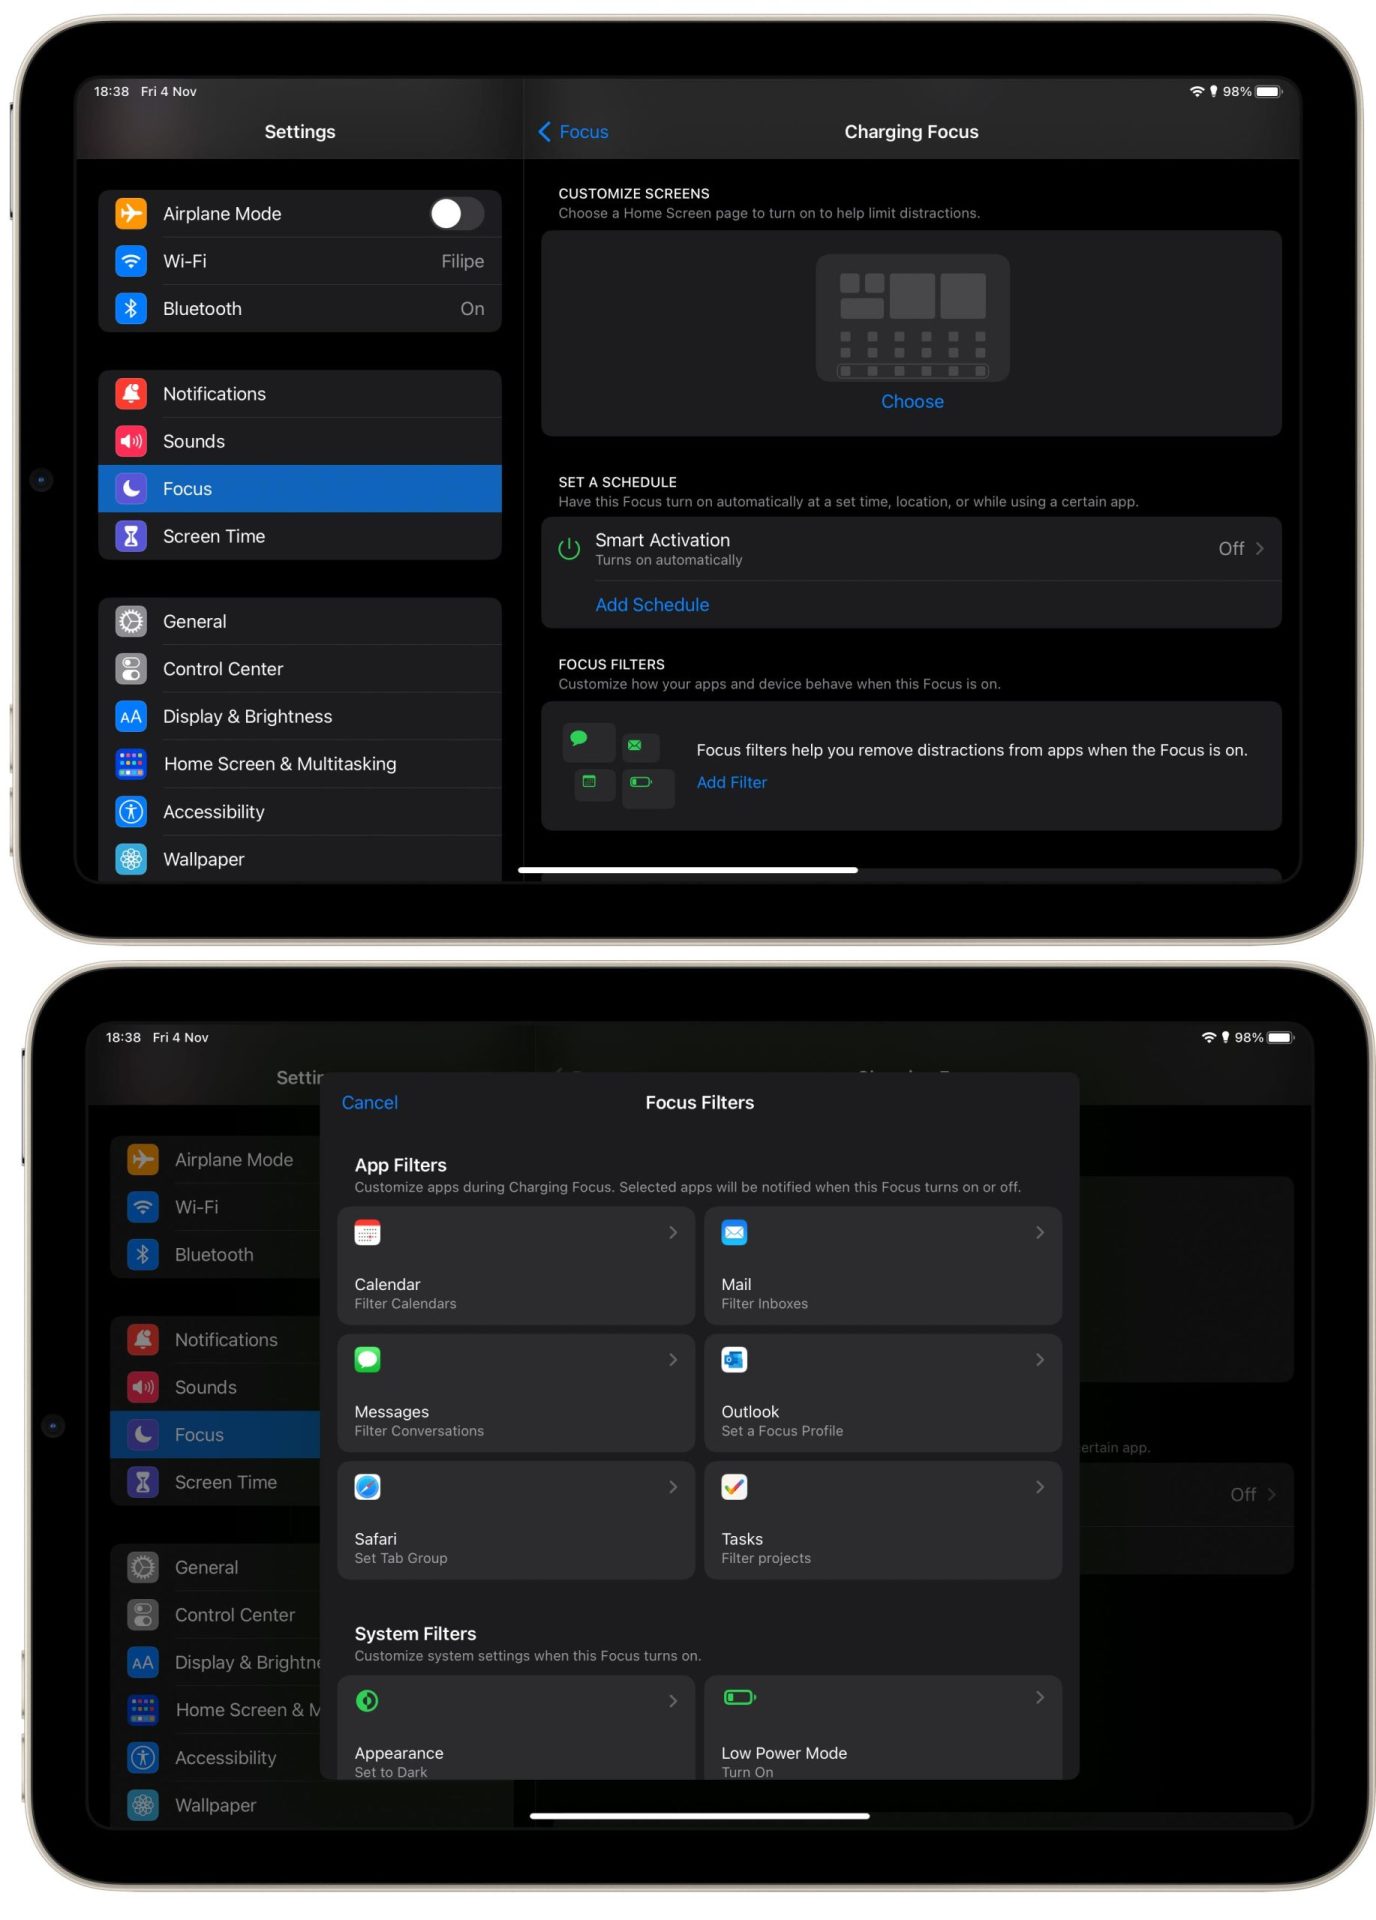 In iOS 15 and iPadOS 15, Apple introduced the Focus mode as a new way for the user to personalize notifications according to their performance.